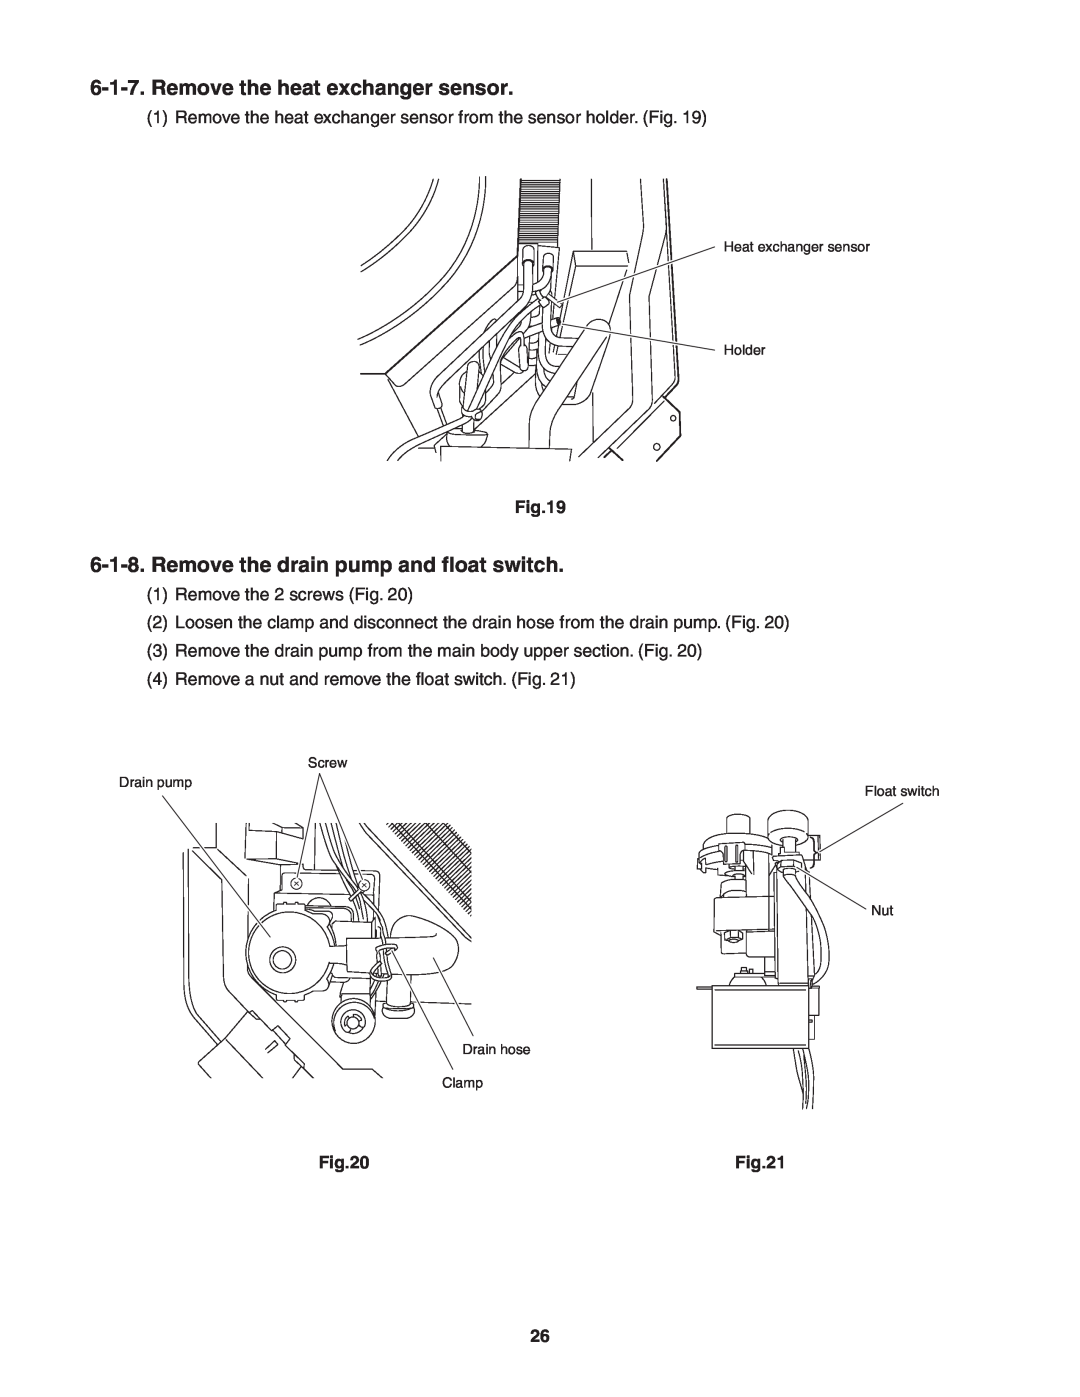 Panasonic R410A service manual Remove the heat exchanger sensor, Remove the drain pump and float switch 